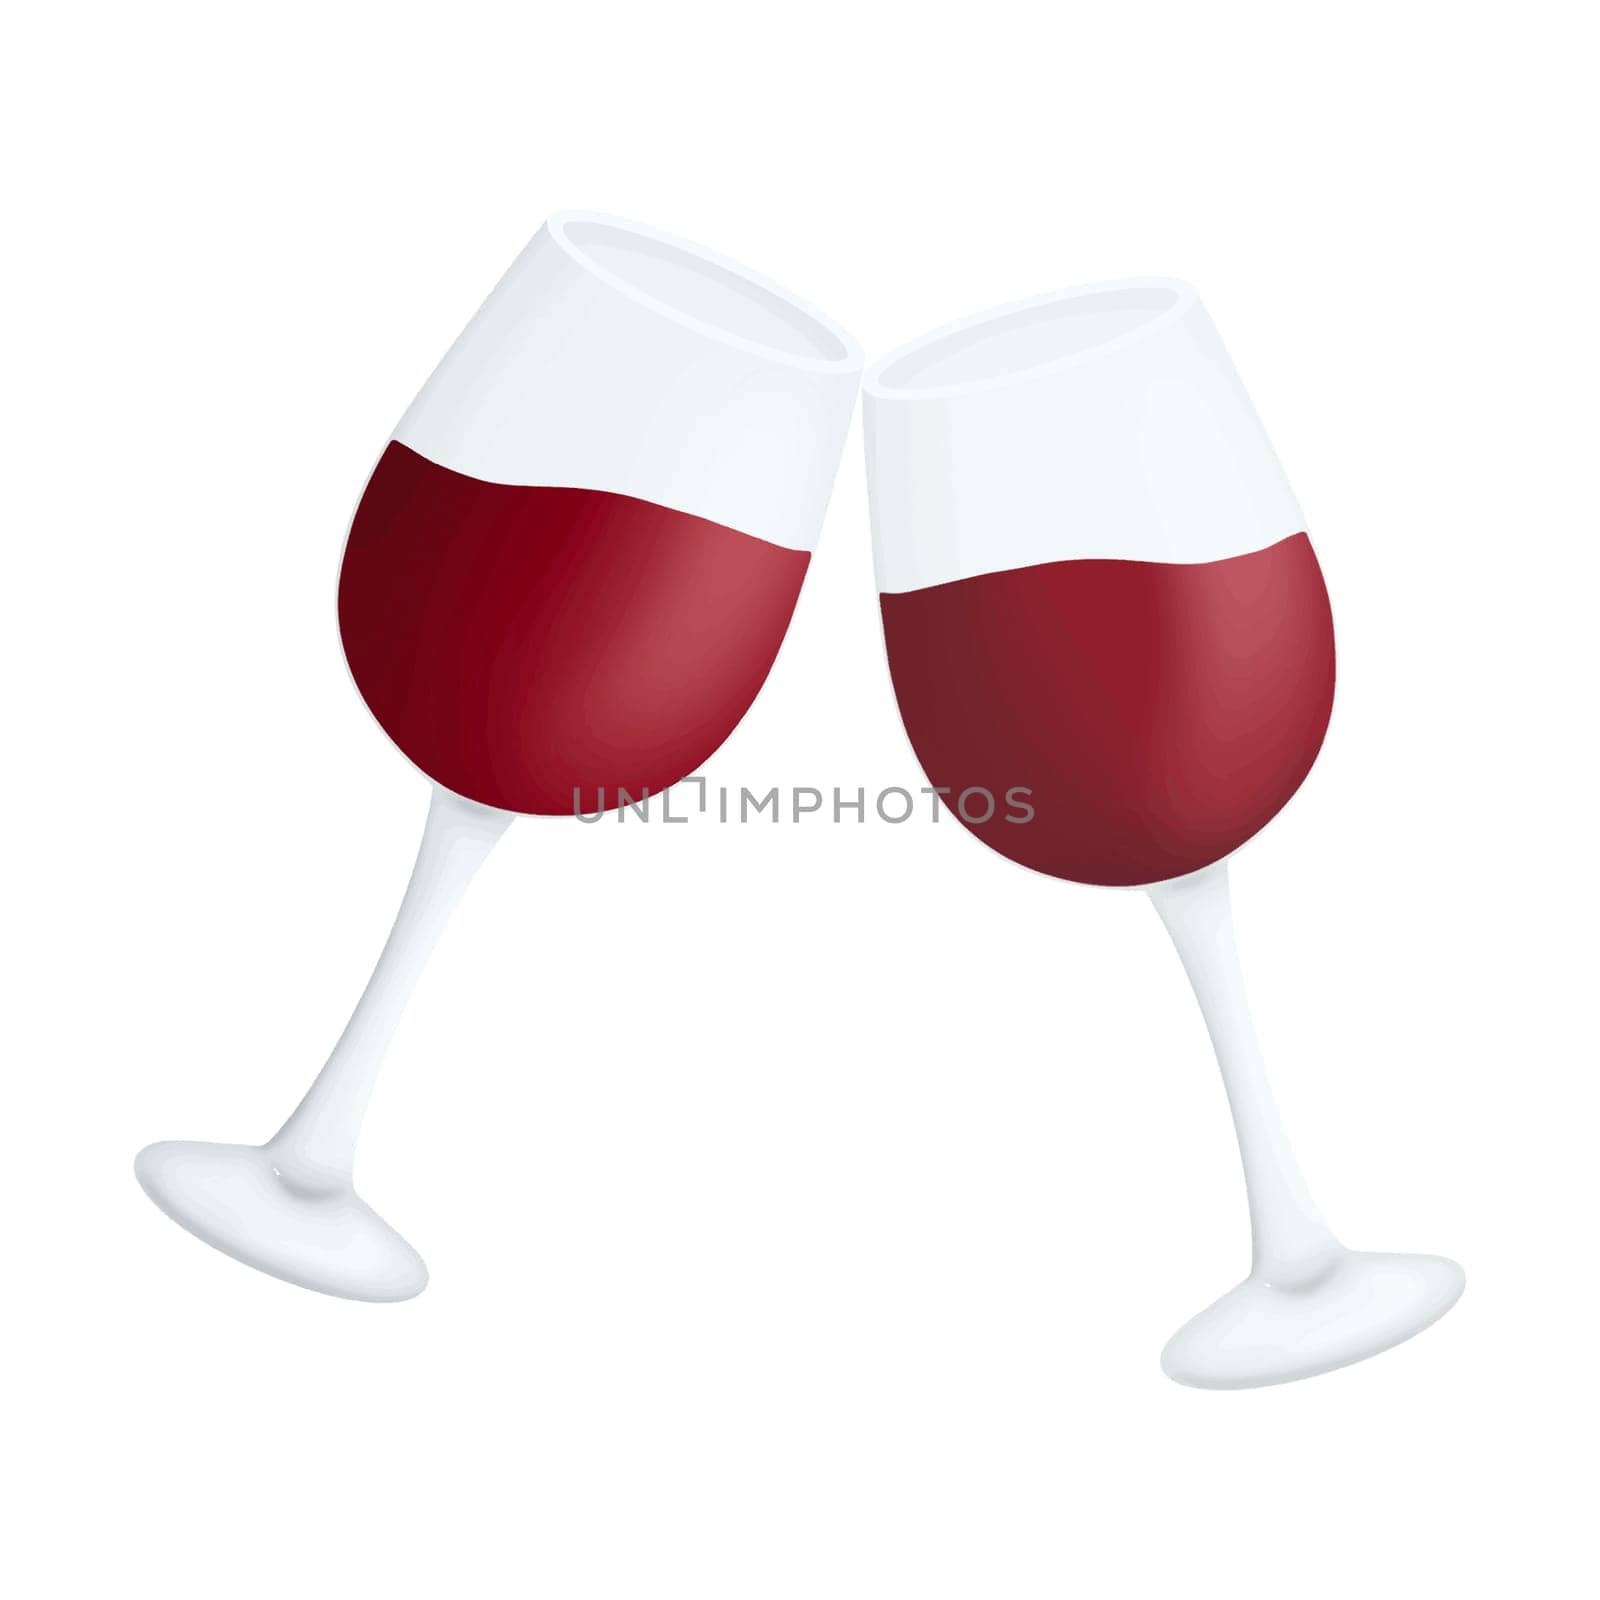 Two glasses red wine toasting party illustration isolated clipart. Party Clipart for celebration design, planner sticker, pattern, background, invitations, greeting cards, sublimation.